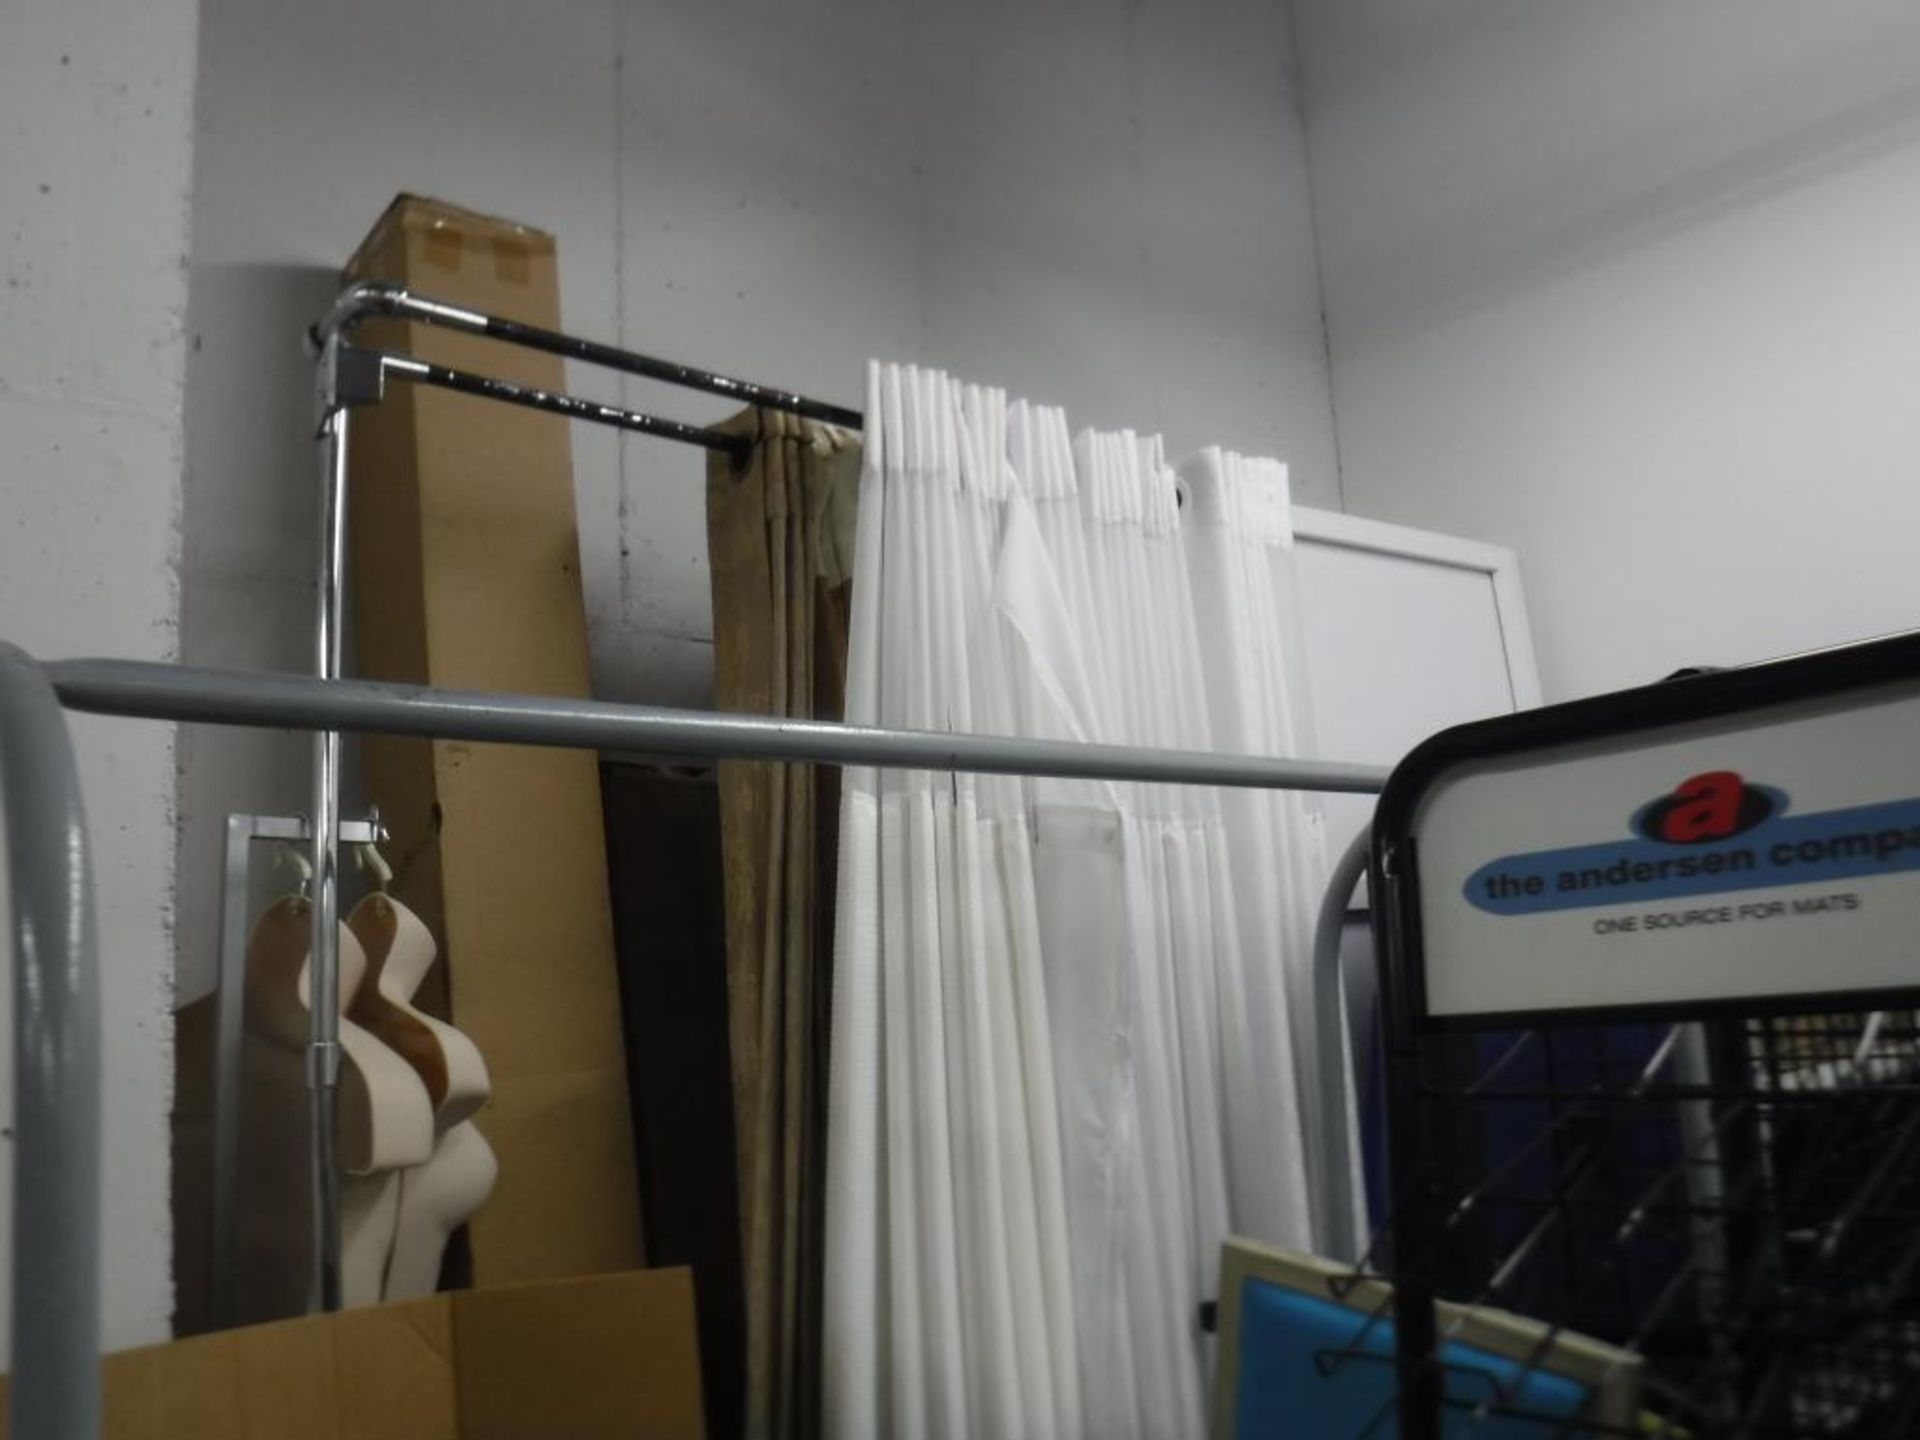 Lot c/o: Merchandising Storage Room-(NO PERSONAL INCLUDEDNO SHELVING) All Contents, Rolling Ladder, - Image 4 of 40